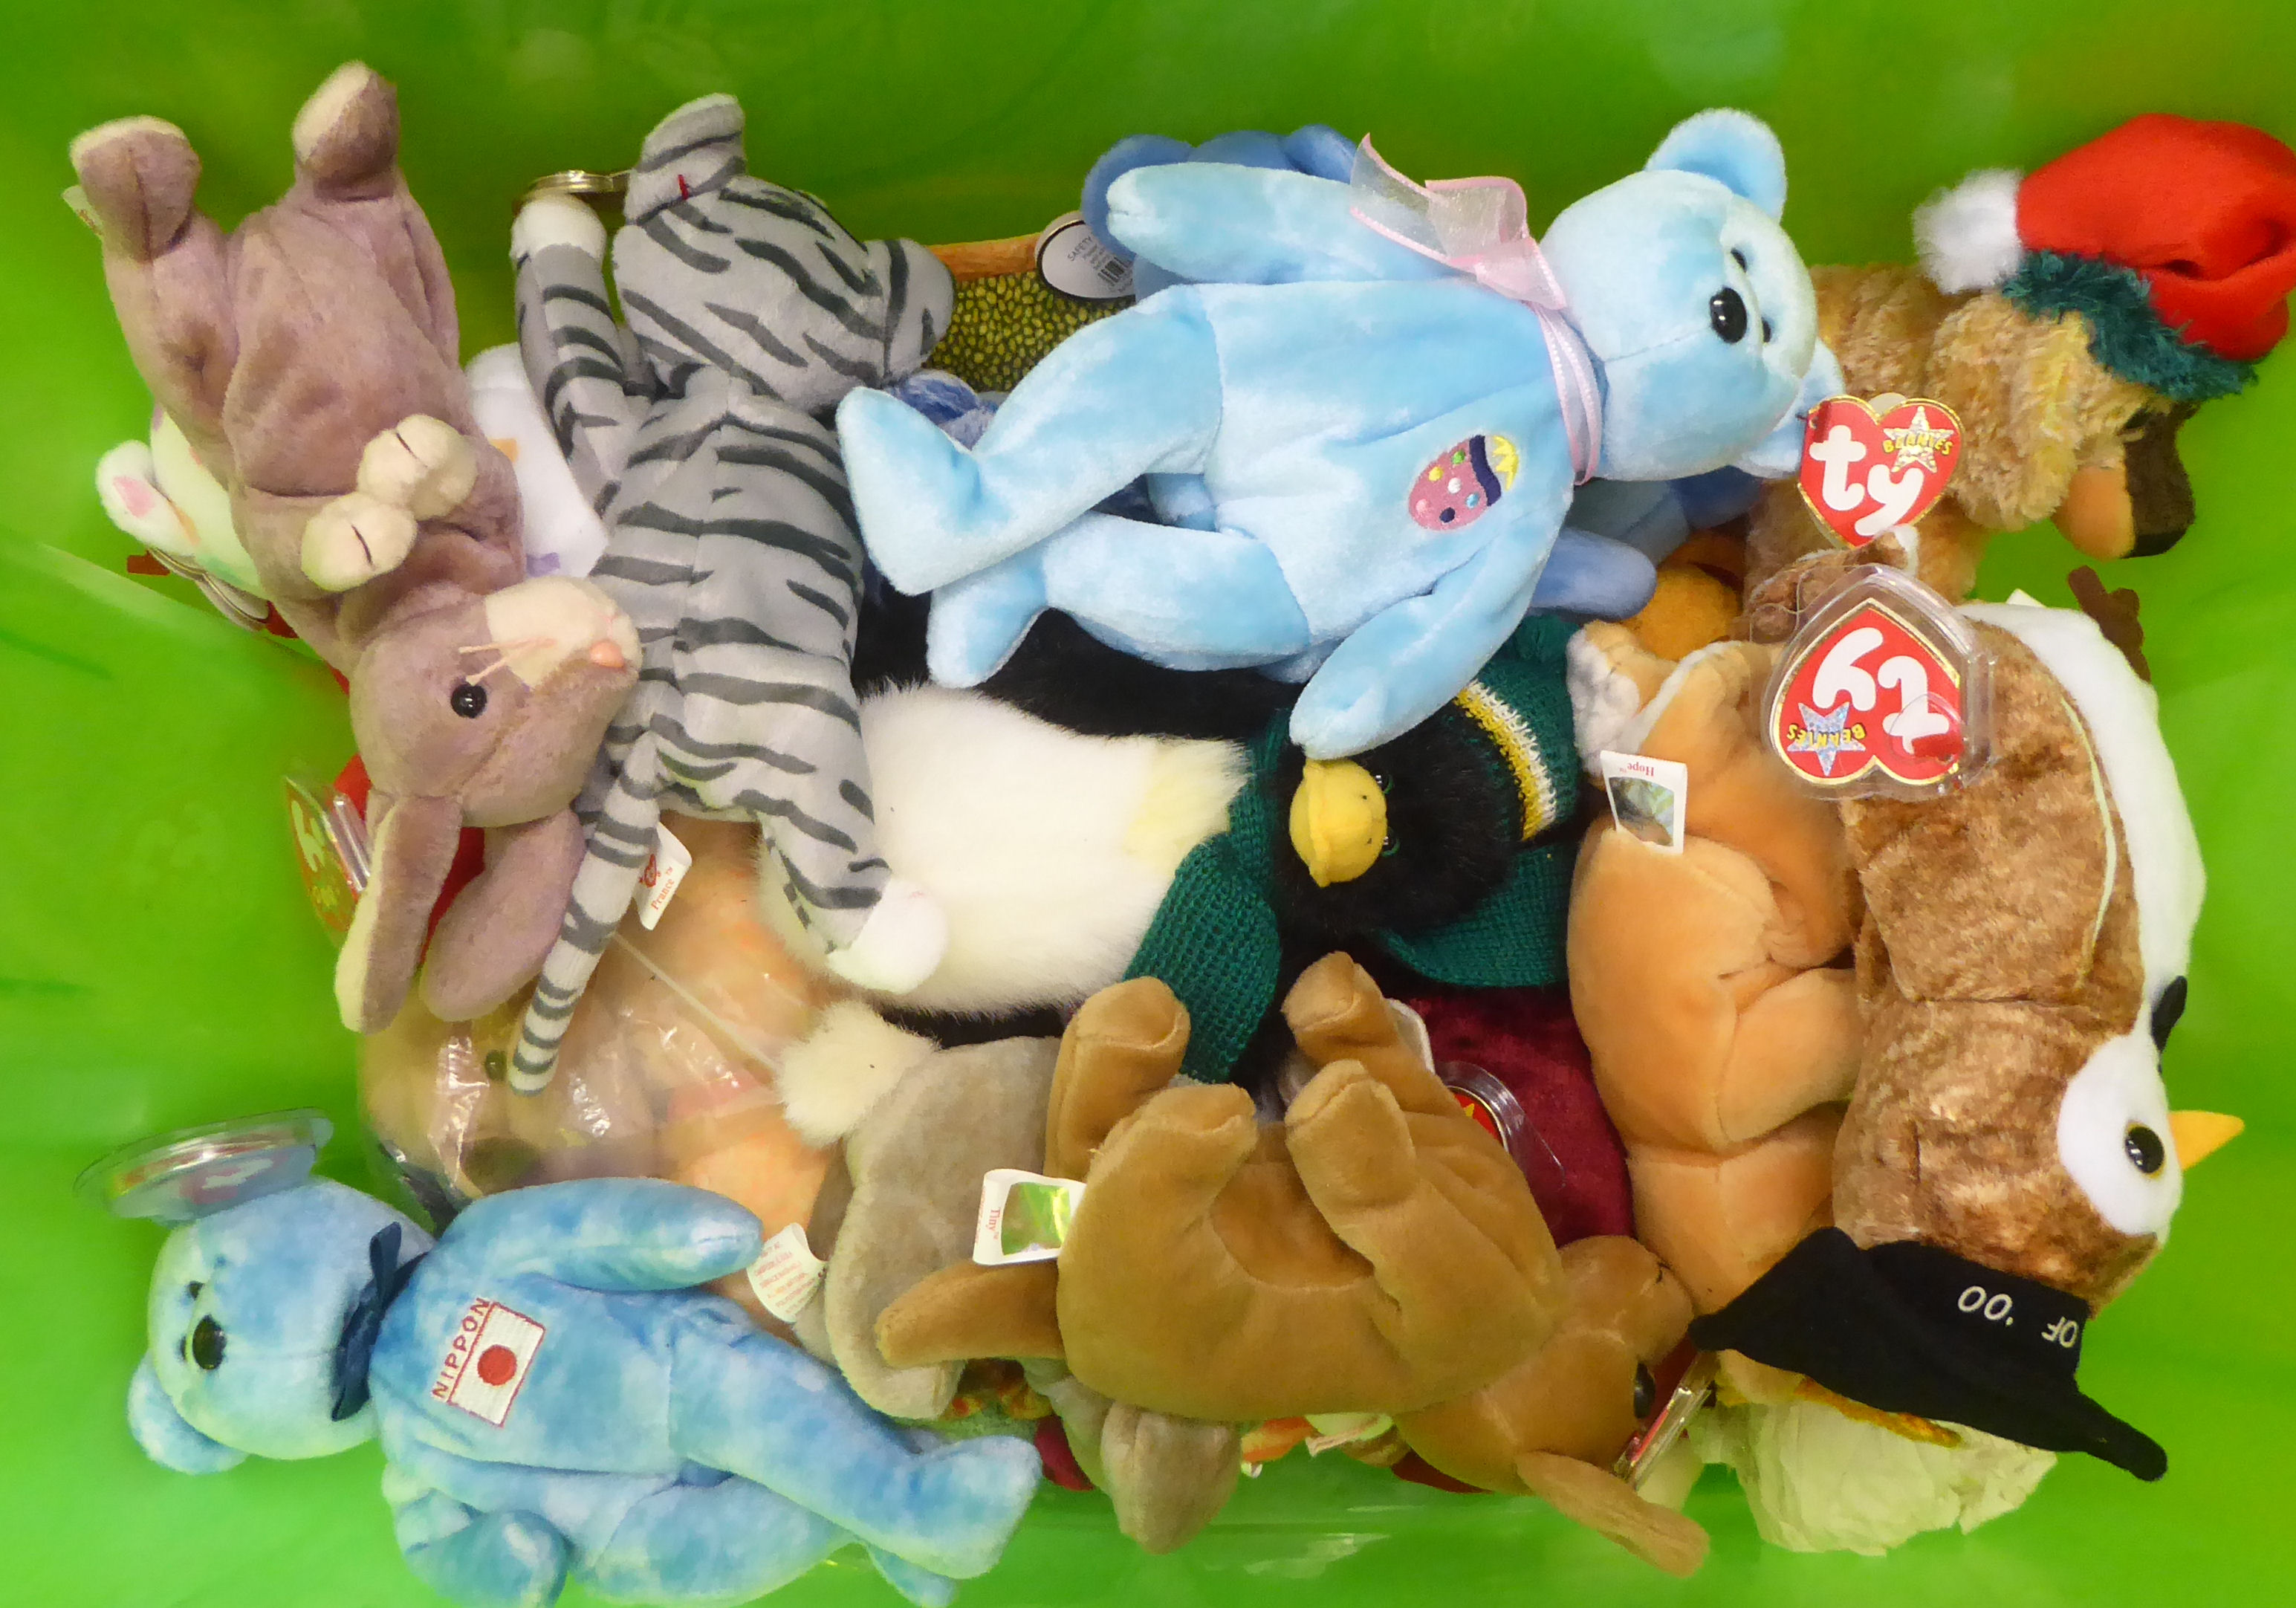 Twenty five Beanie Babies Teddy bears and animals: to include a cat